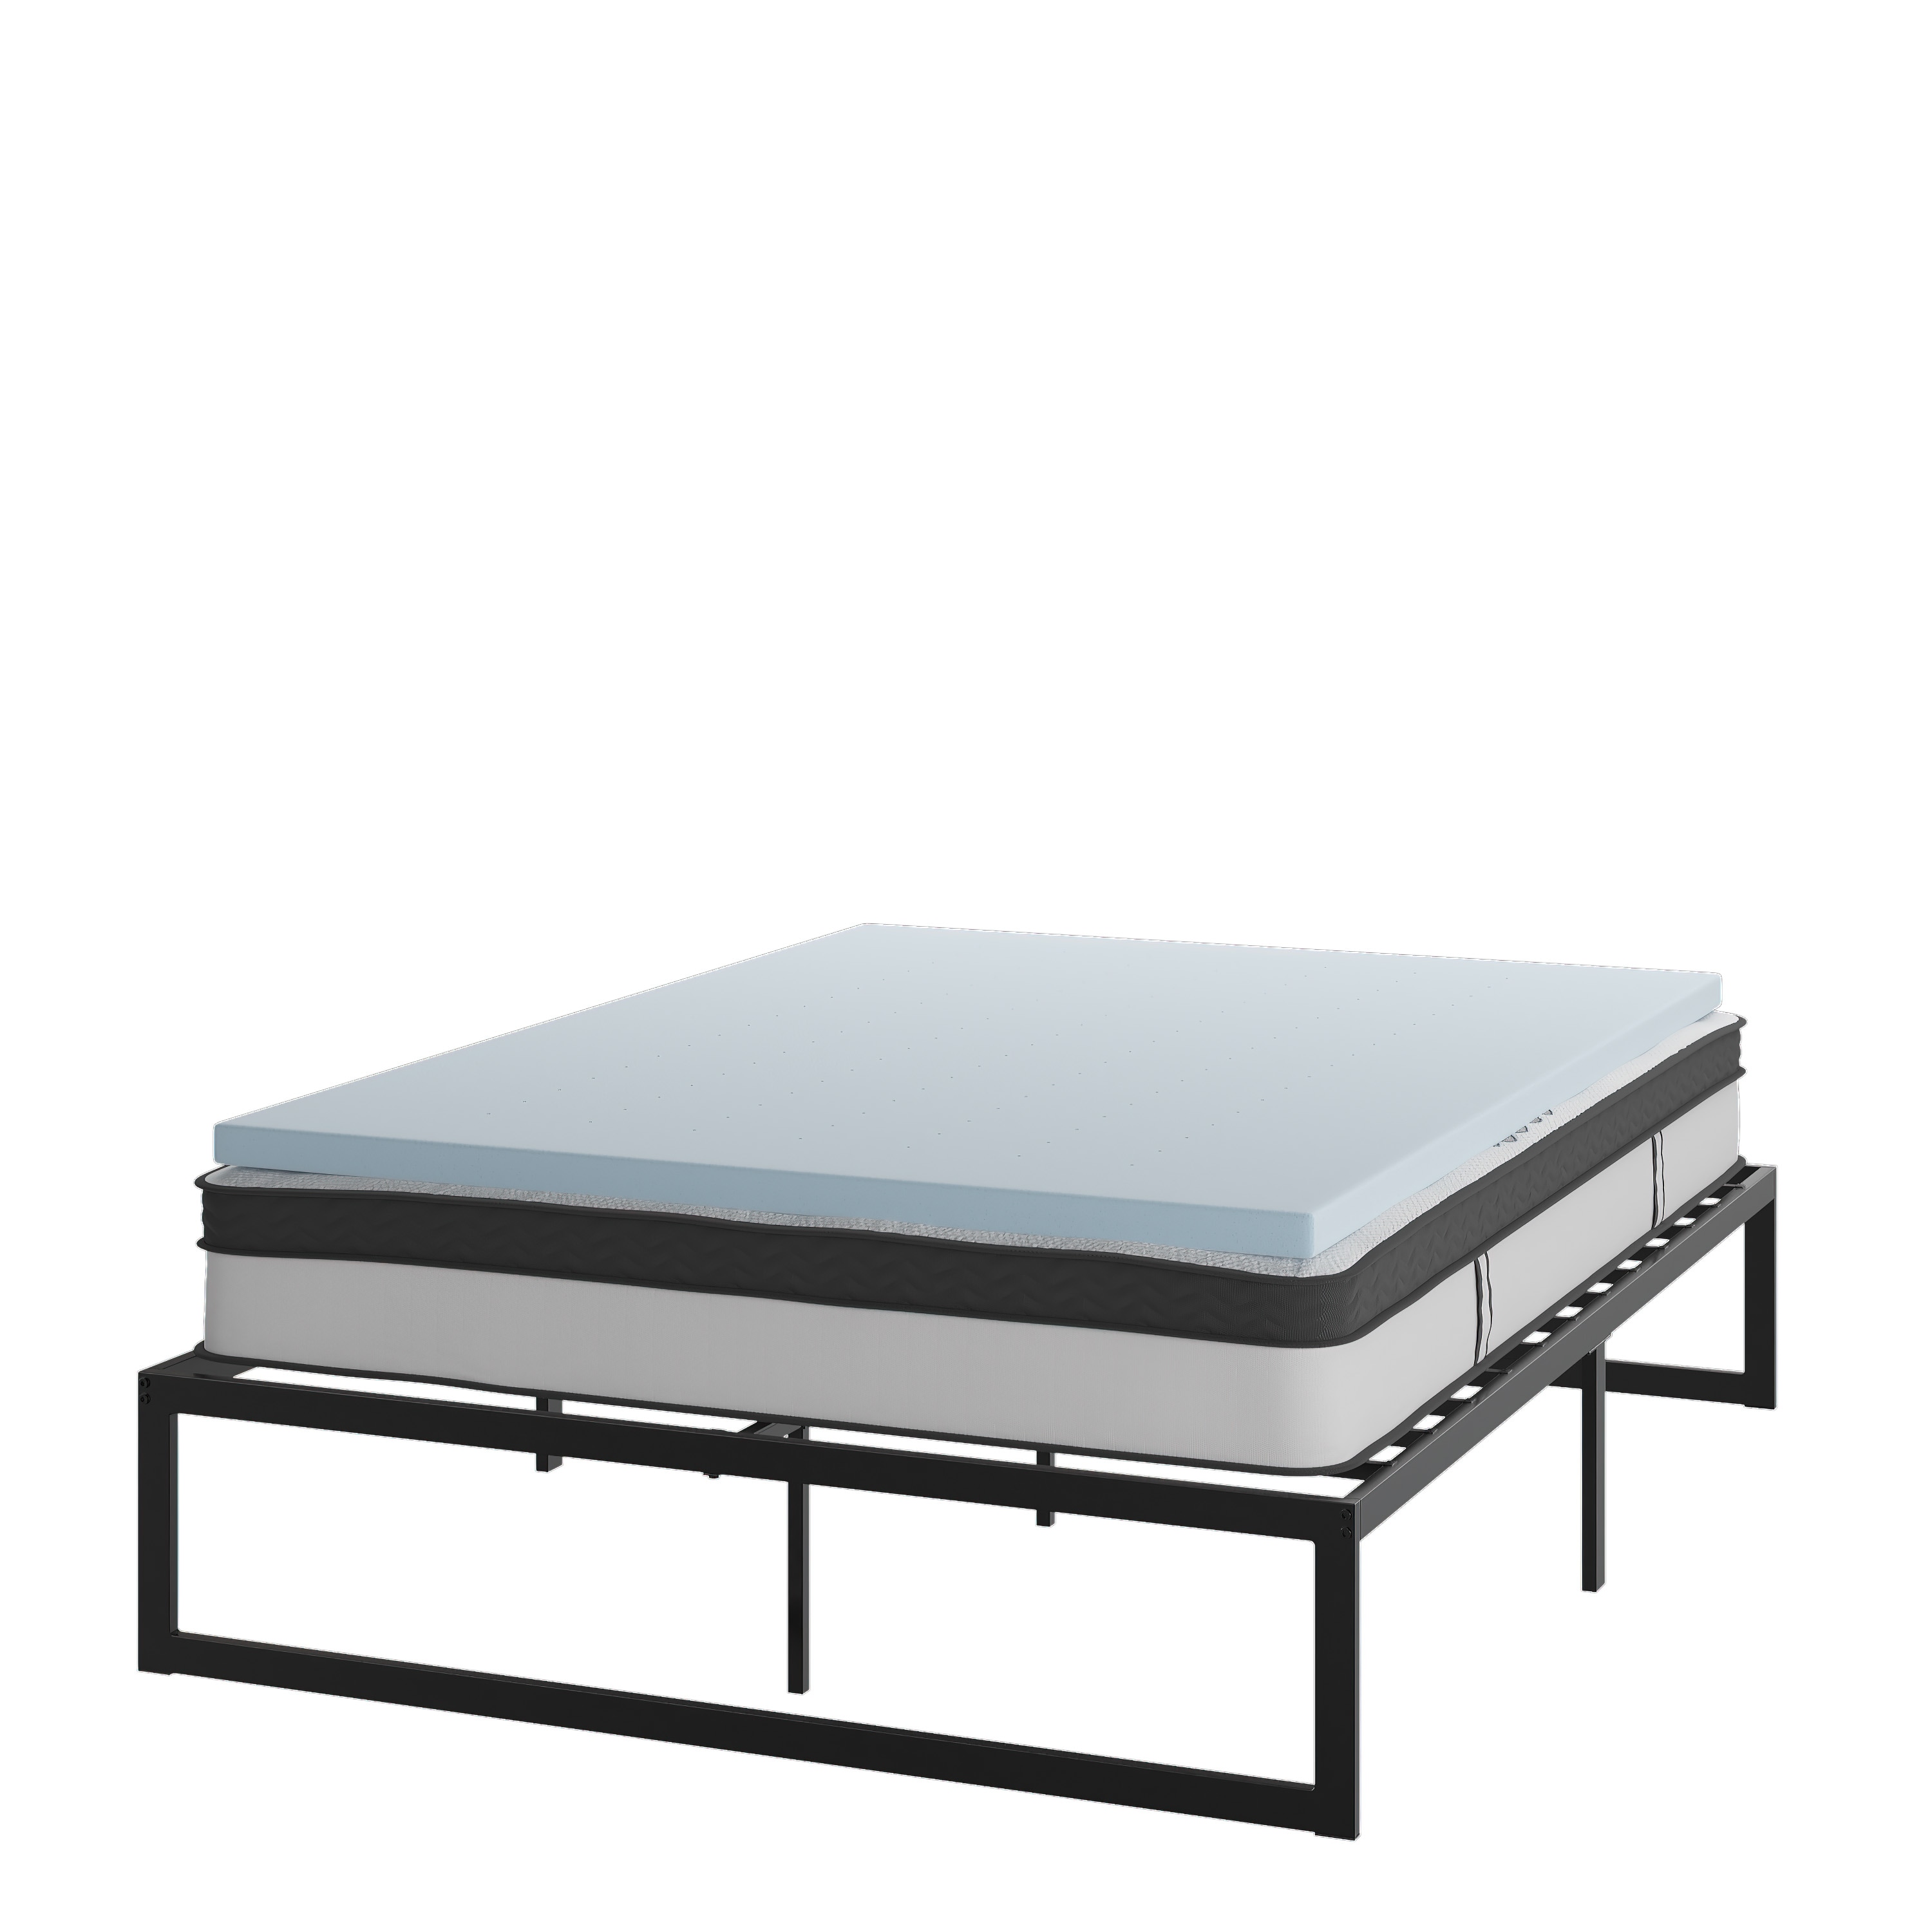 Flash Furniture 14 Inch Metal Platform Bed Frame with 10 Inch Pocket Spring Mattress and 2 Inch Cool Gel Memory Foam Topper - Queen Queen -  XU-BD10-10PSM2M35-Q-GG